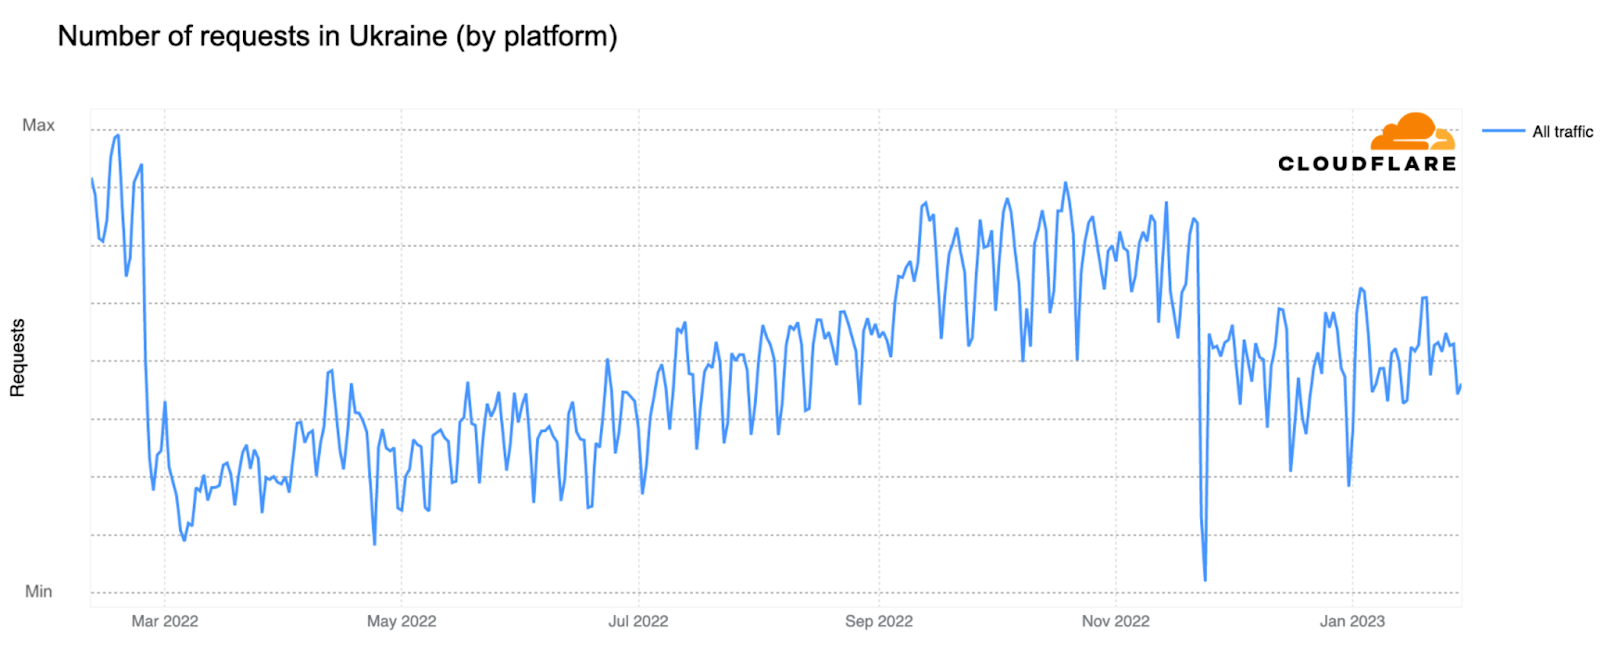 The following chart shows Cloudflare’s perspective on daily traffic (by number of requests).